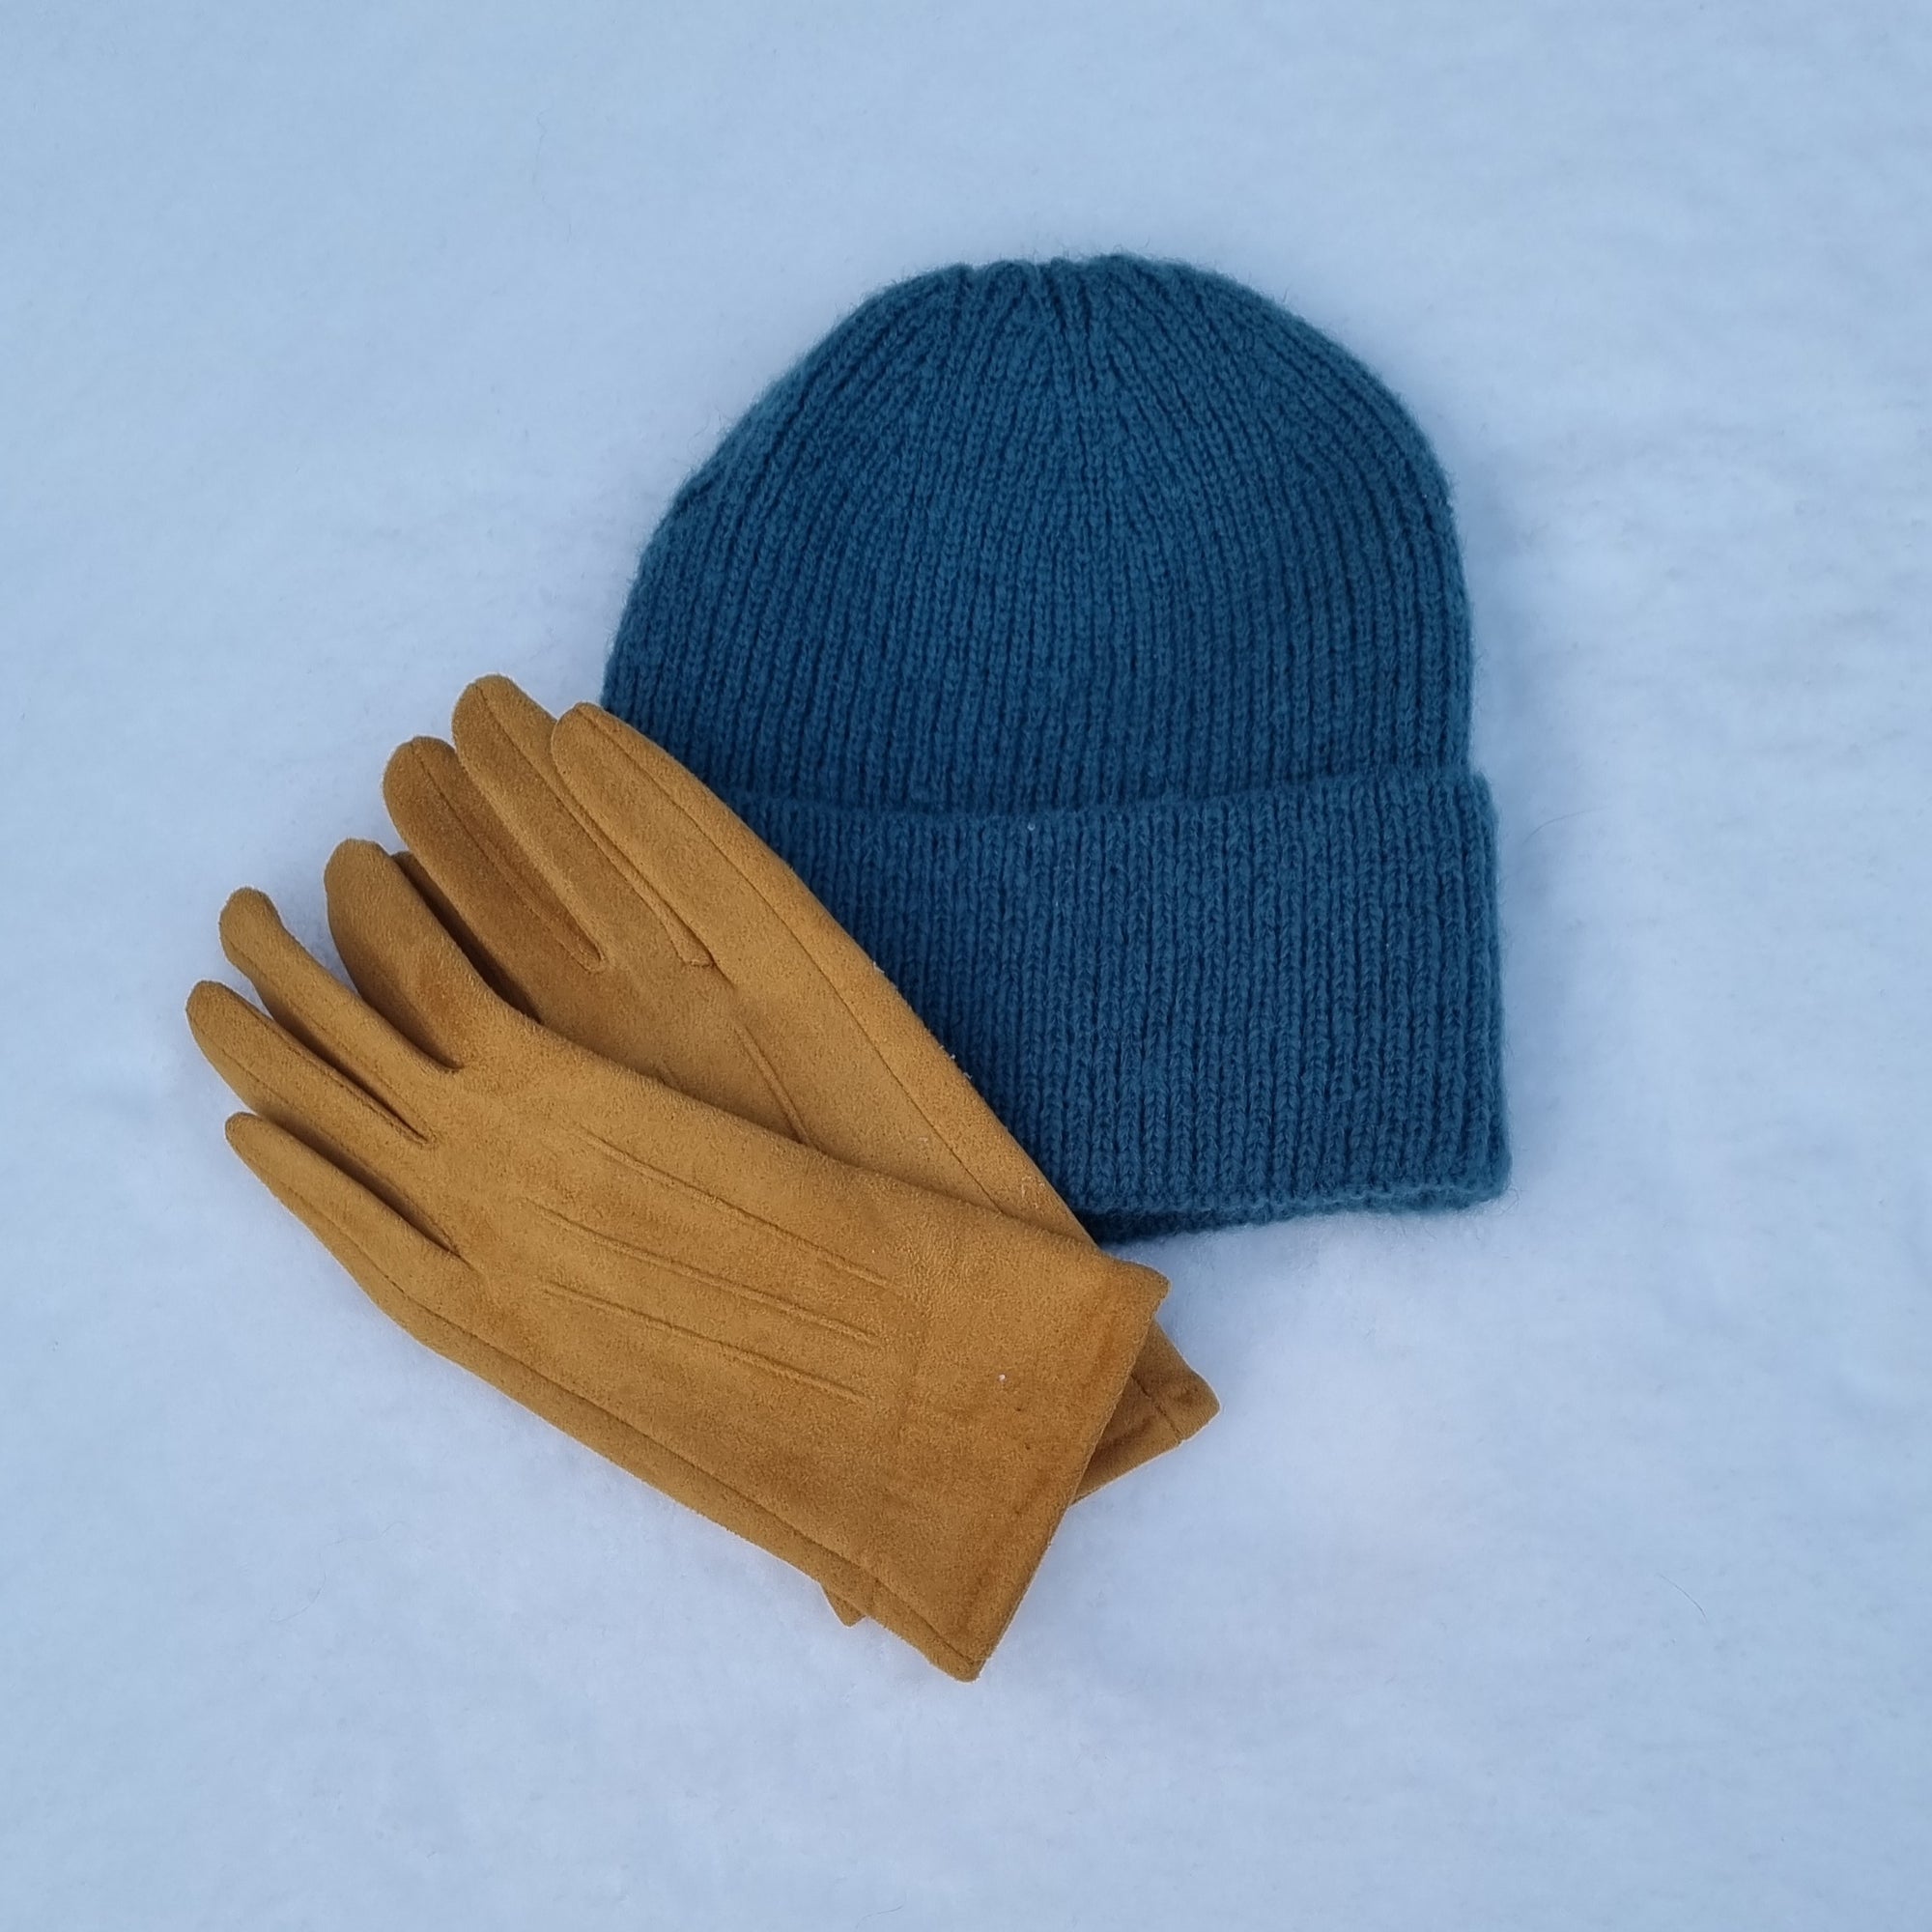 Frost yellow gloves